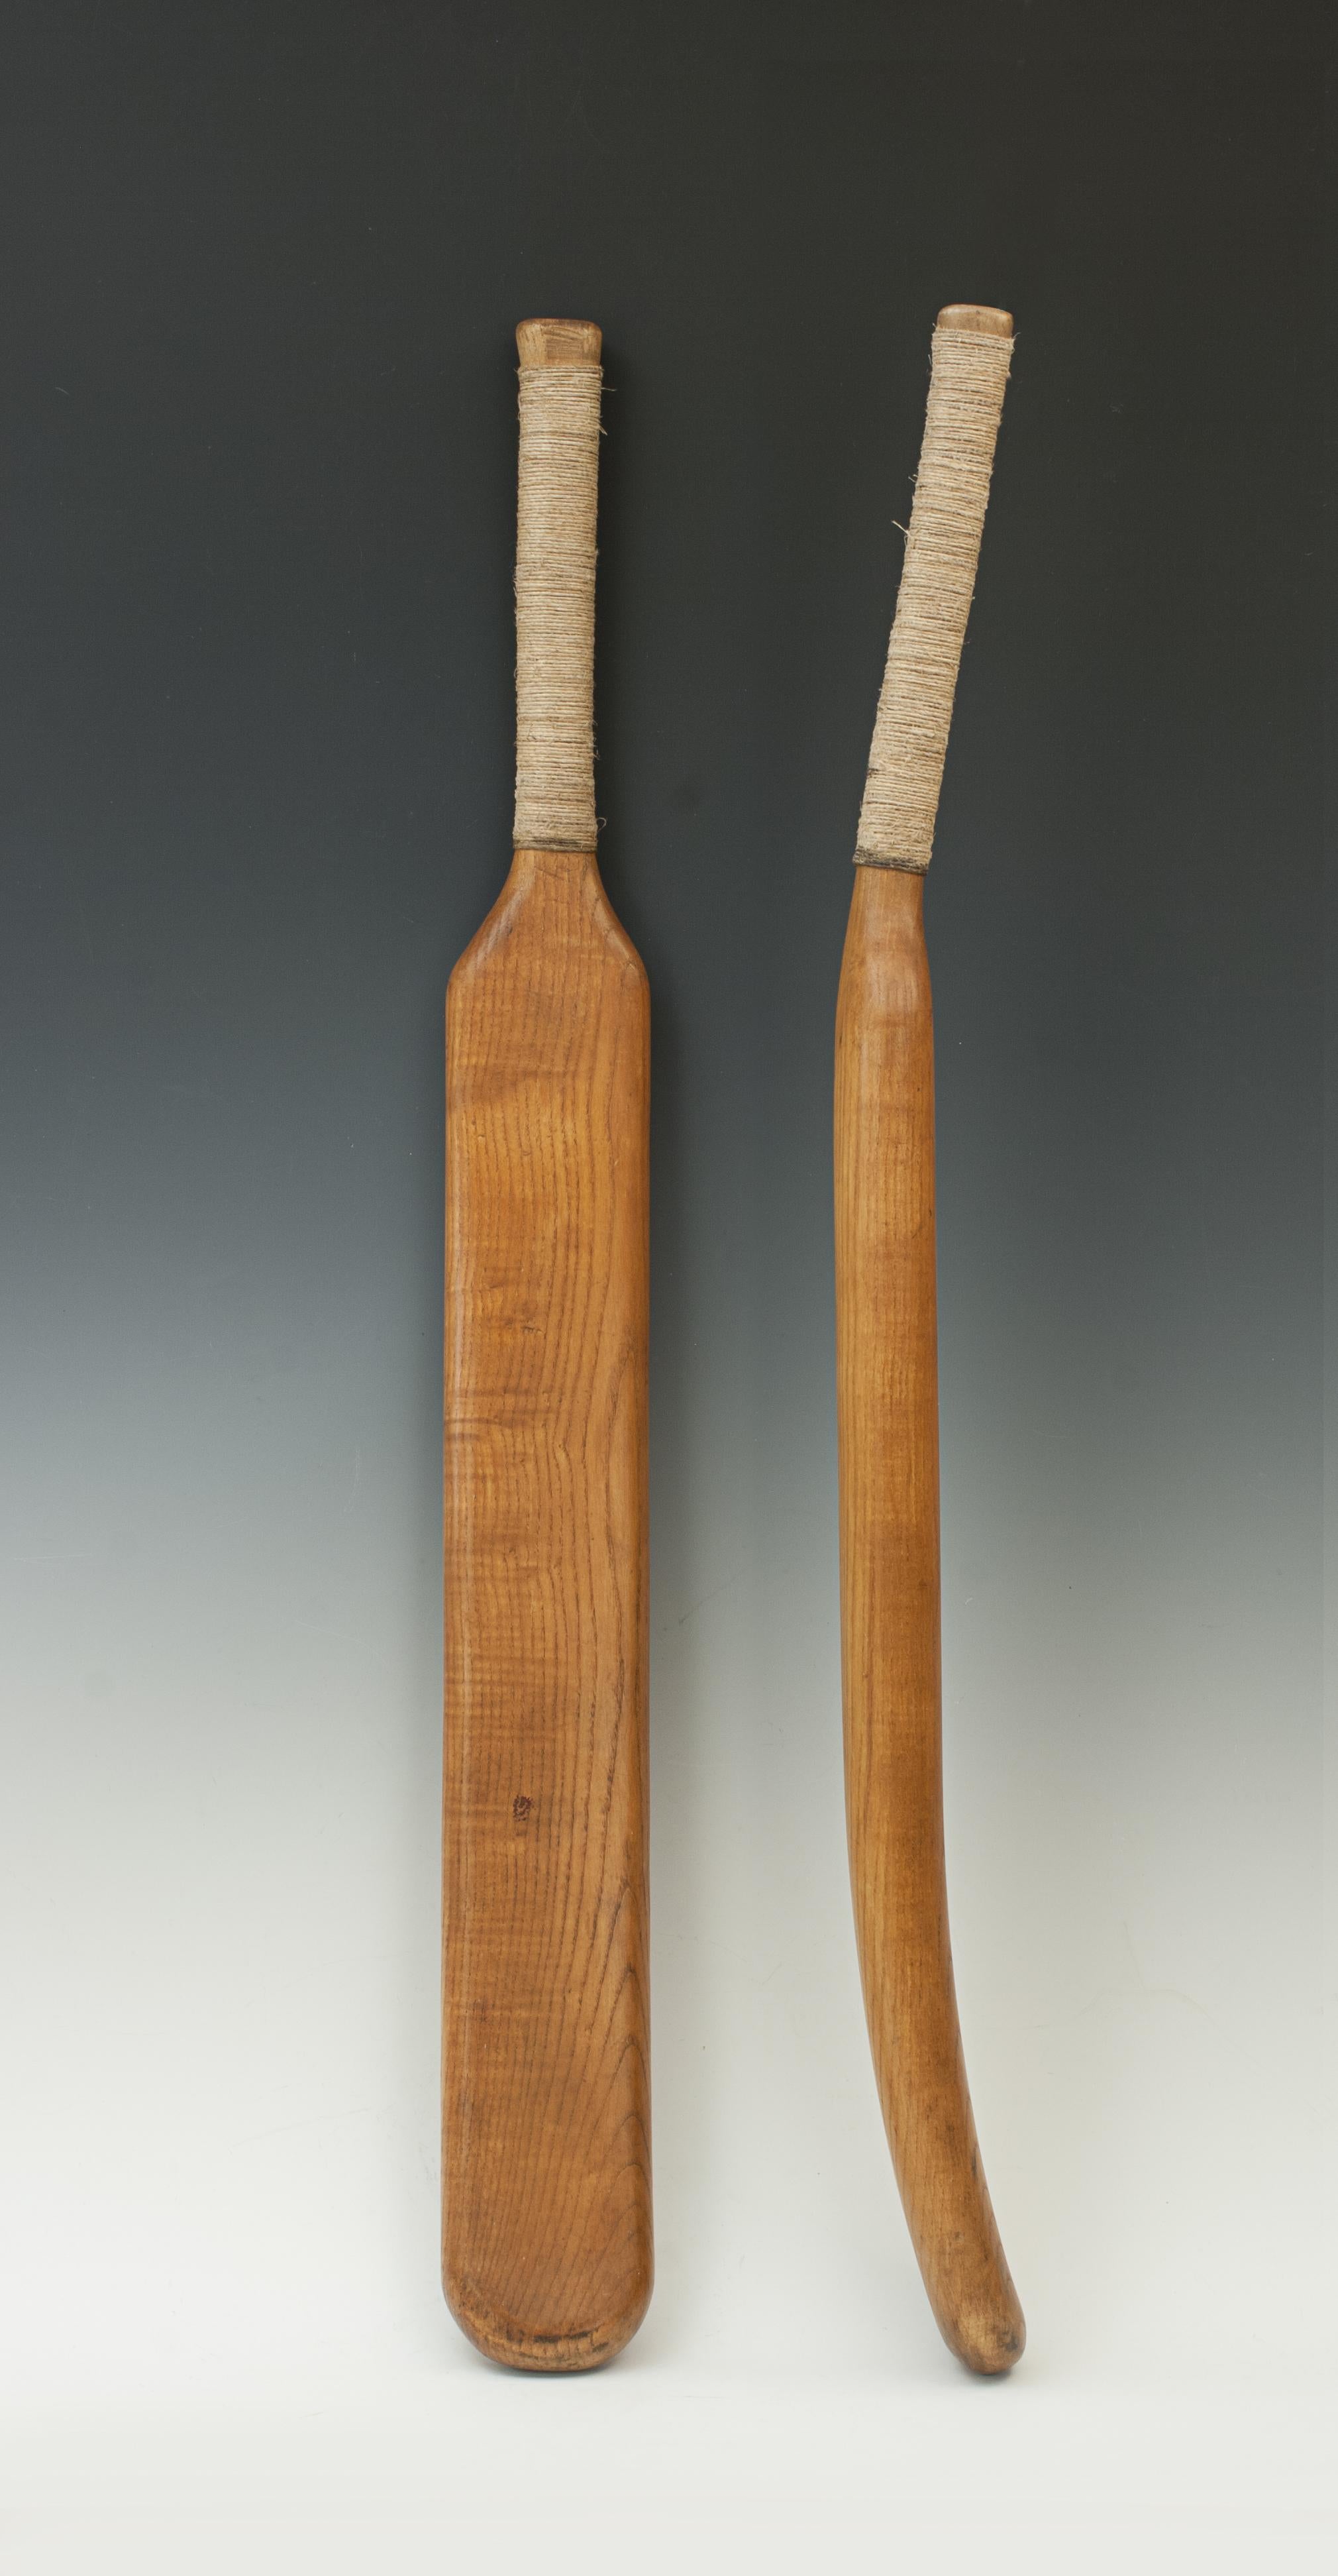 Curved early oak cricket bat.
An unusual shaped, heavy weight, one piece cricket bat of the style used in the 1770s. The blade has an inward bow, convex surface, instead of being flat like the more traditional bats we think of today. The handle has